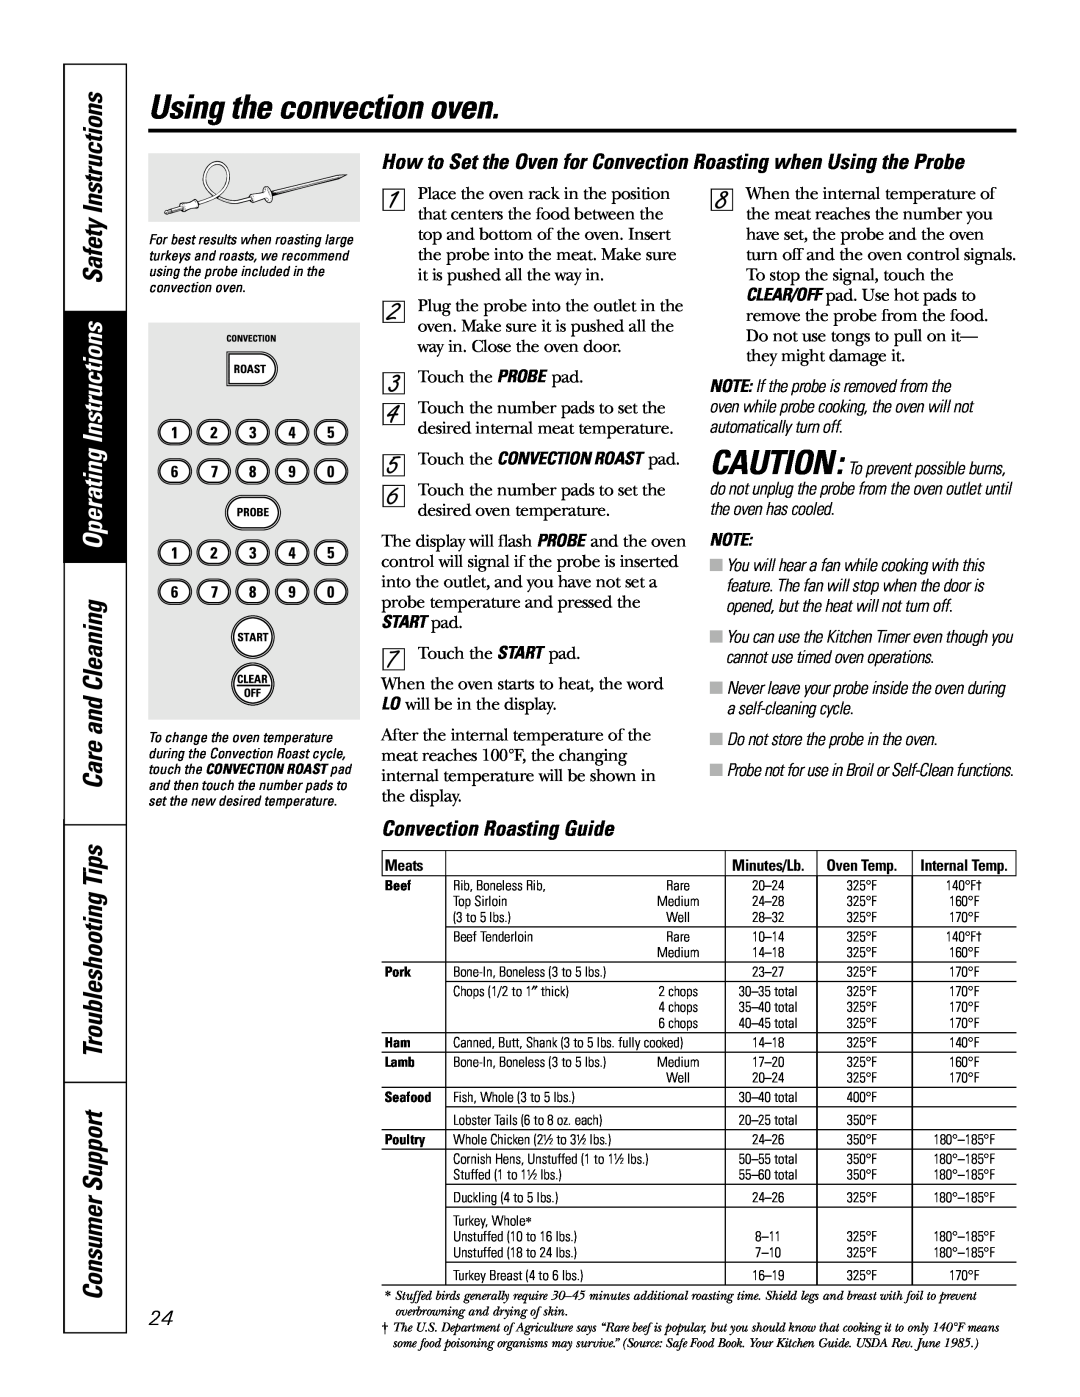 GE JB905 owner manual Using the convection oven, Care and Cleaning Operating Instructions Safety, Convection Roasting Guide 